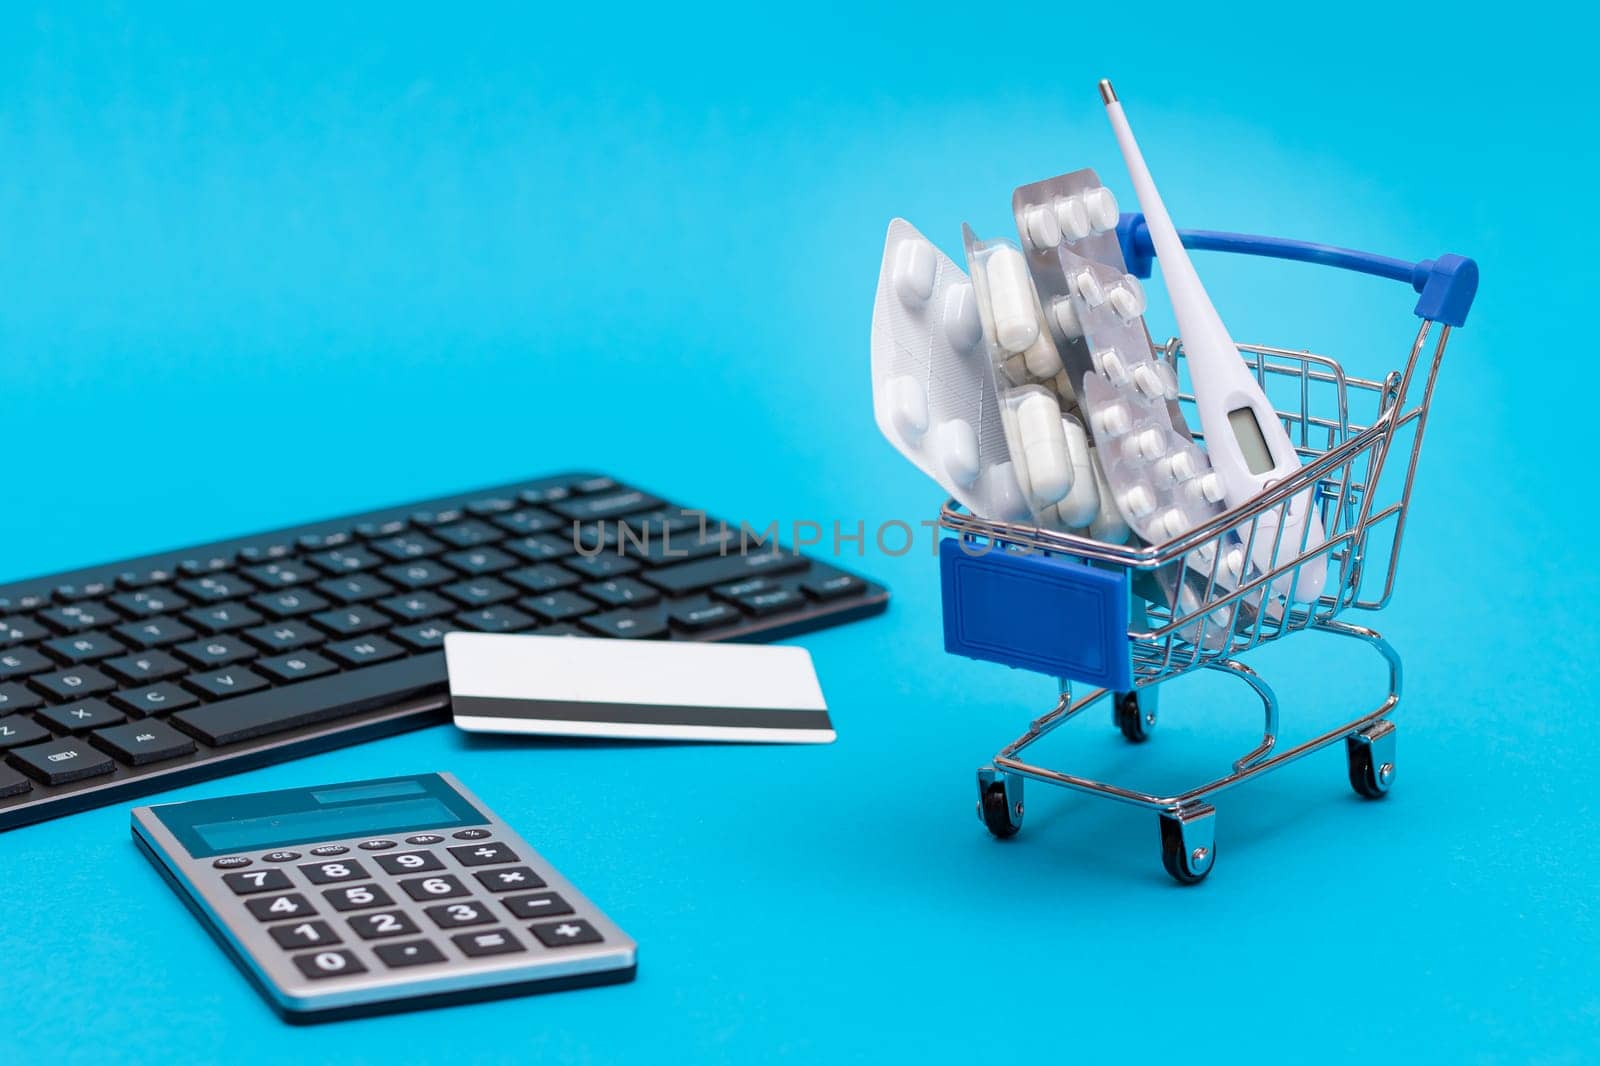 Ordering Medicines. Expensive Medicine and Inflation Concept: Pills and Capsules in a Shopping Cart on Blue Background. Global Pharmaceutical Industry and Big Pharma. Trade in Medicines